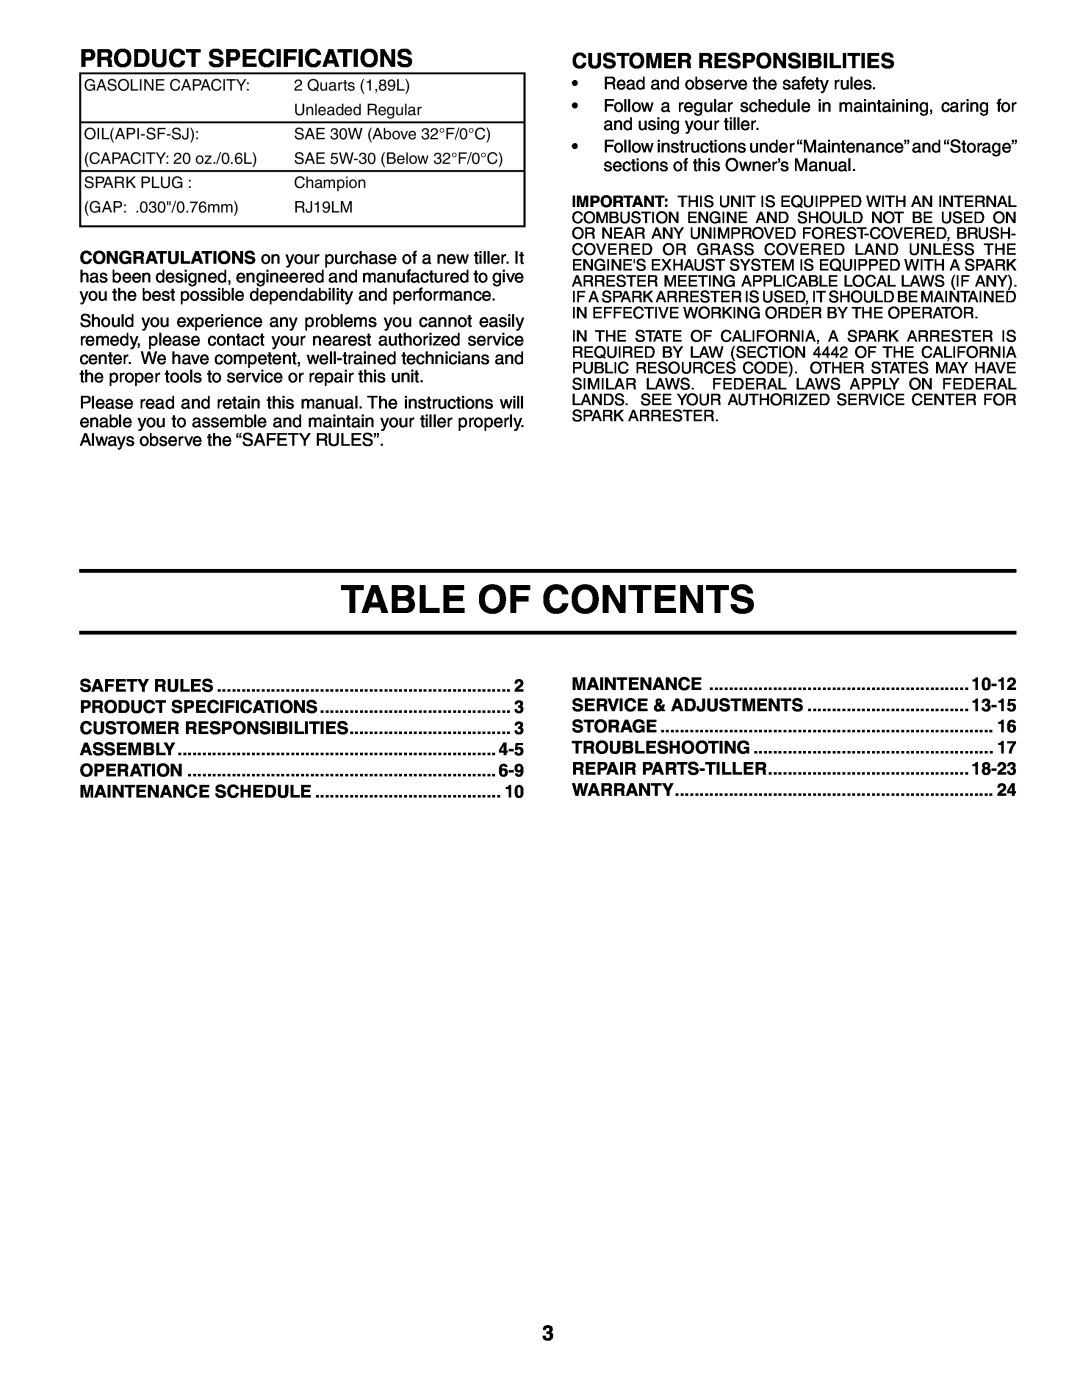 Electrolux FN620K owner manual Table Of Contents, Product Specifications, Customer Responsibilities 